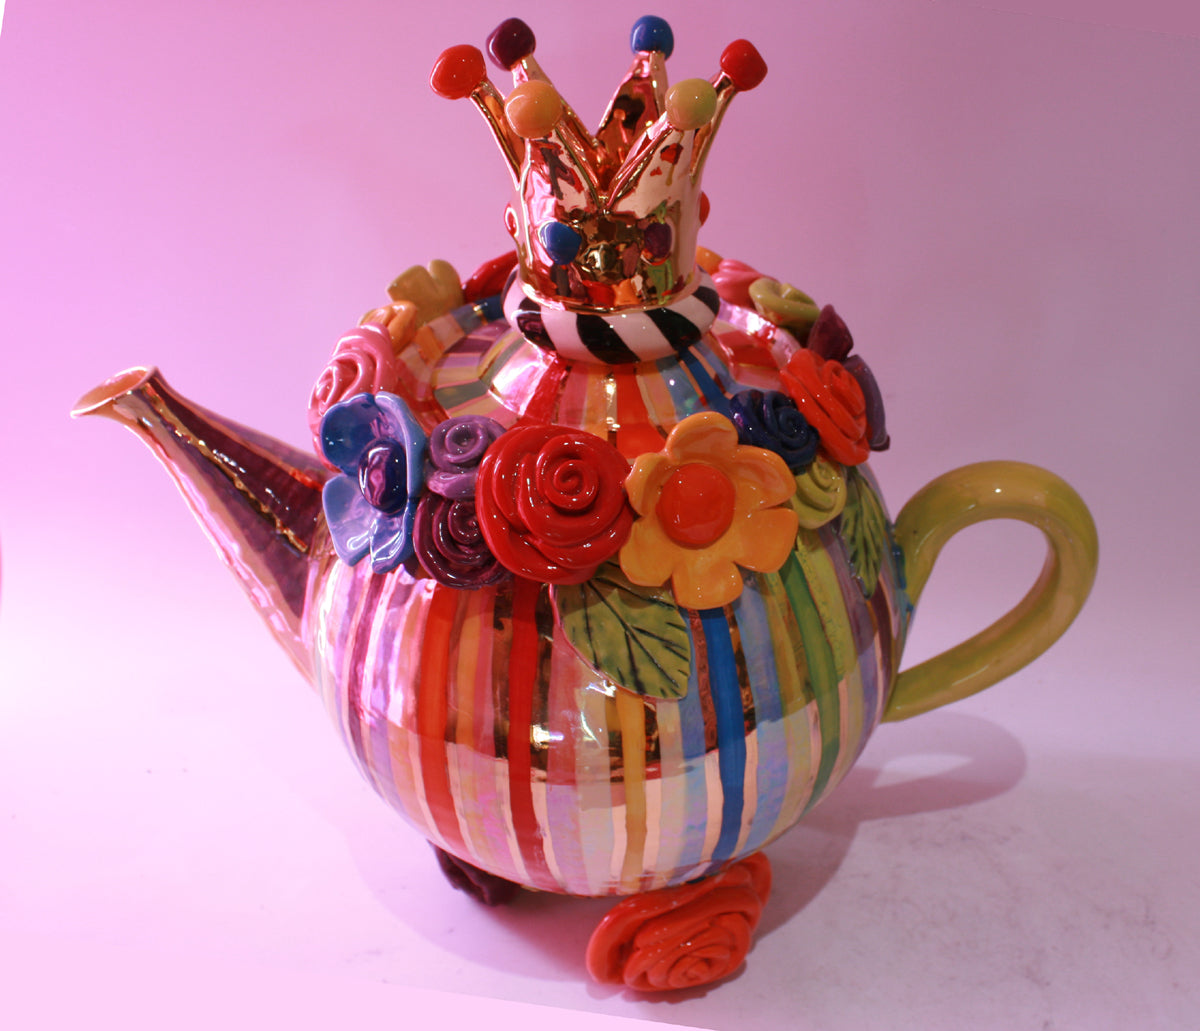 Giant Encrusted Teapot on 3 Rose Feet - MaryRoseYoung